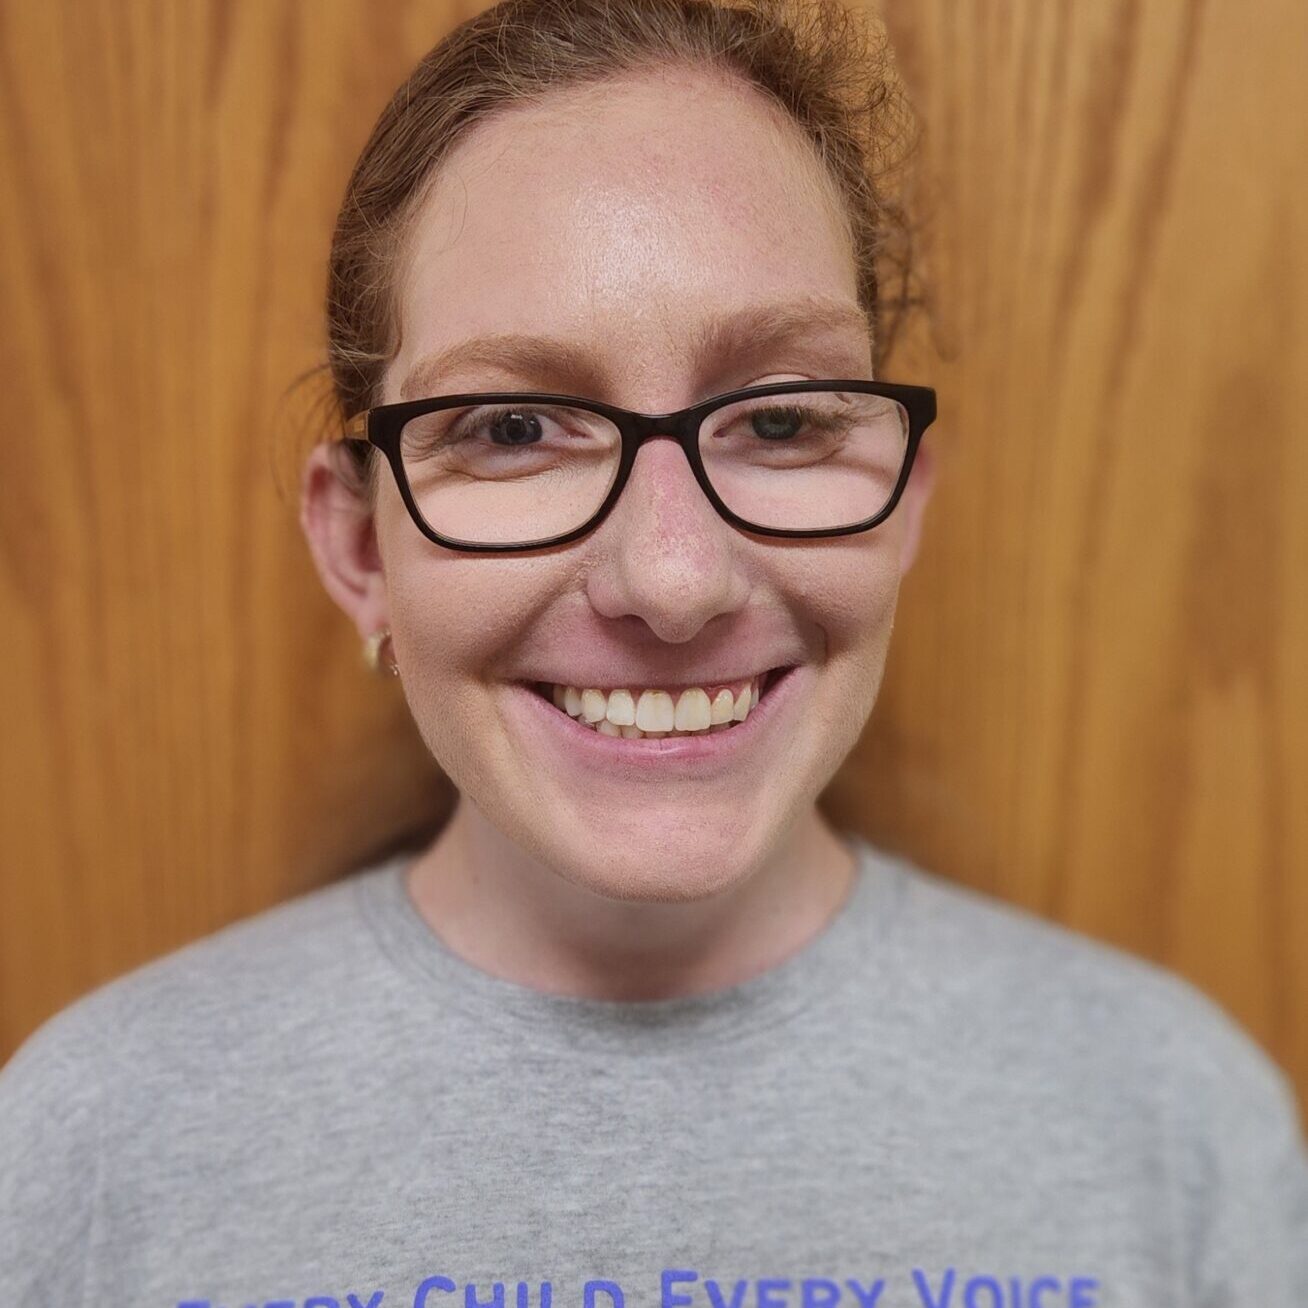 Smiling woman with glasses in a grey t-shirt